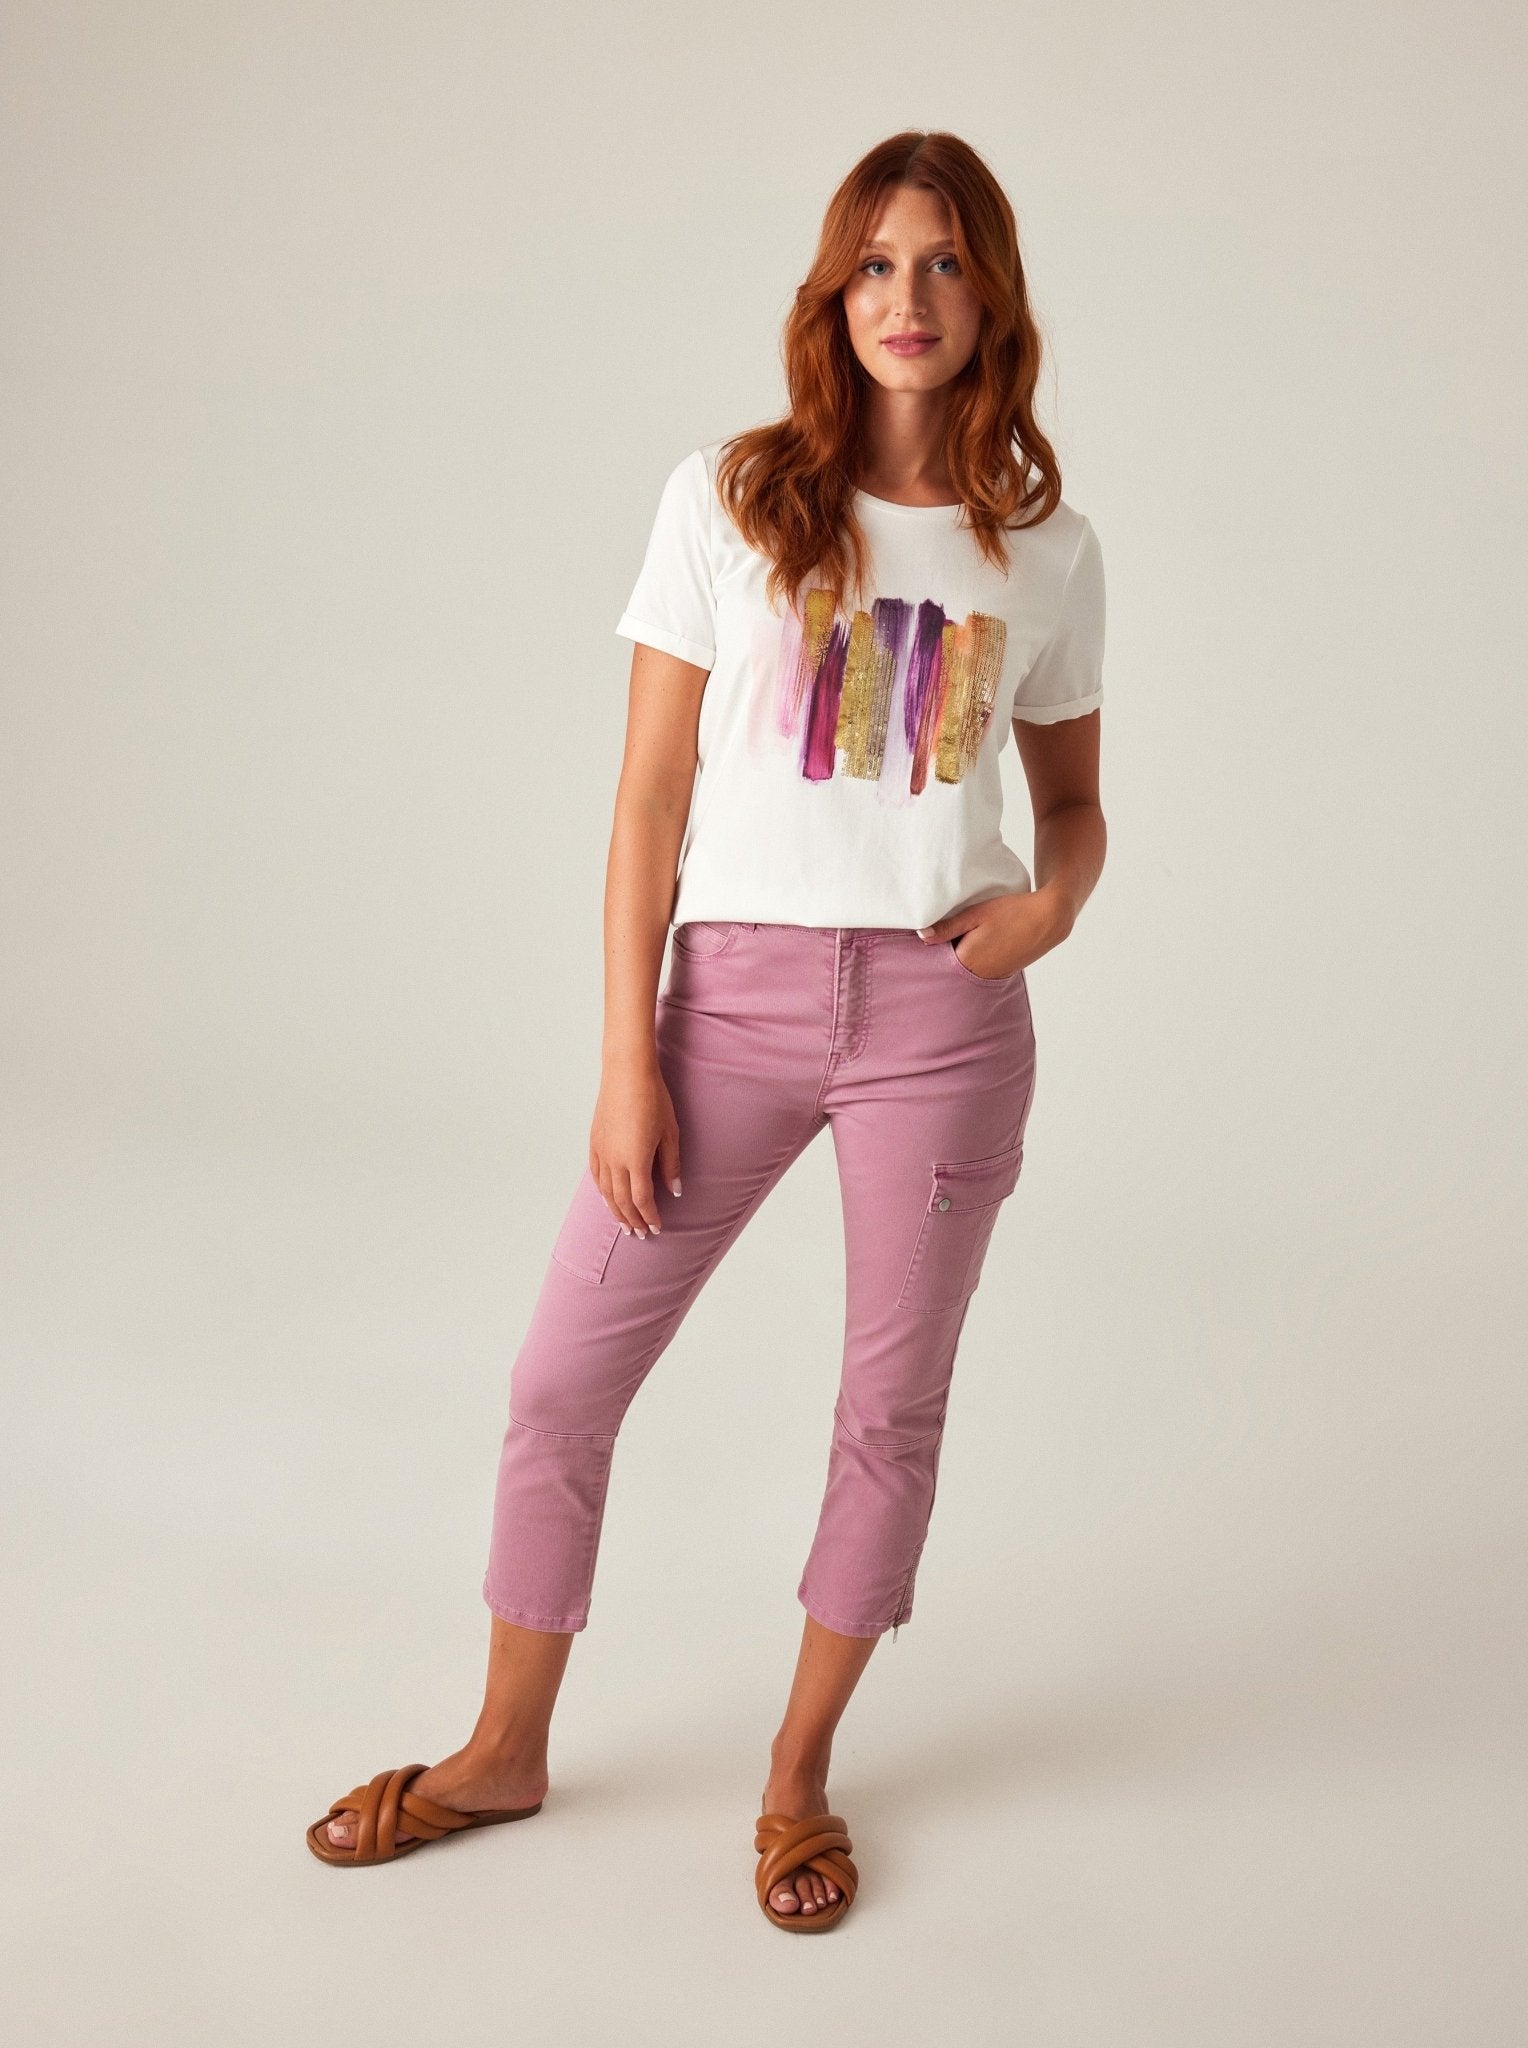 Women's White and Pink Graphic Tee with Sequins – Lala Love Moda